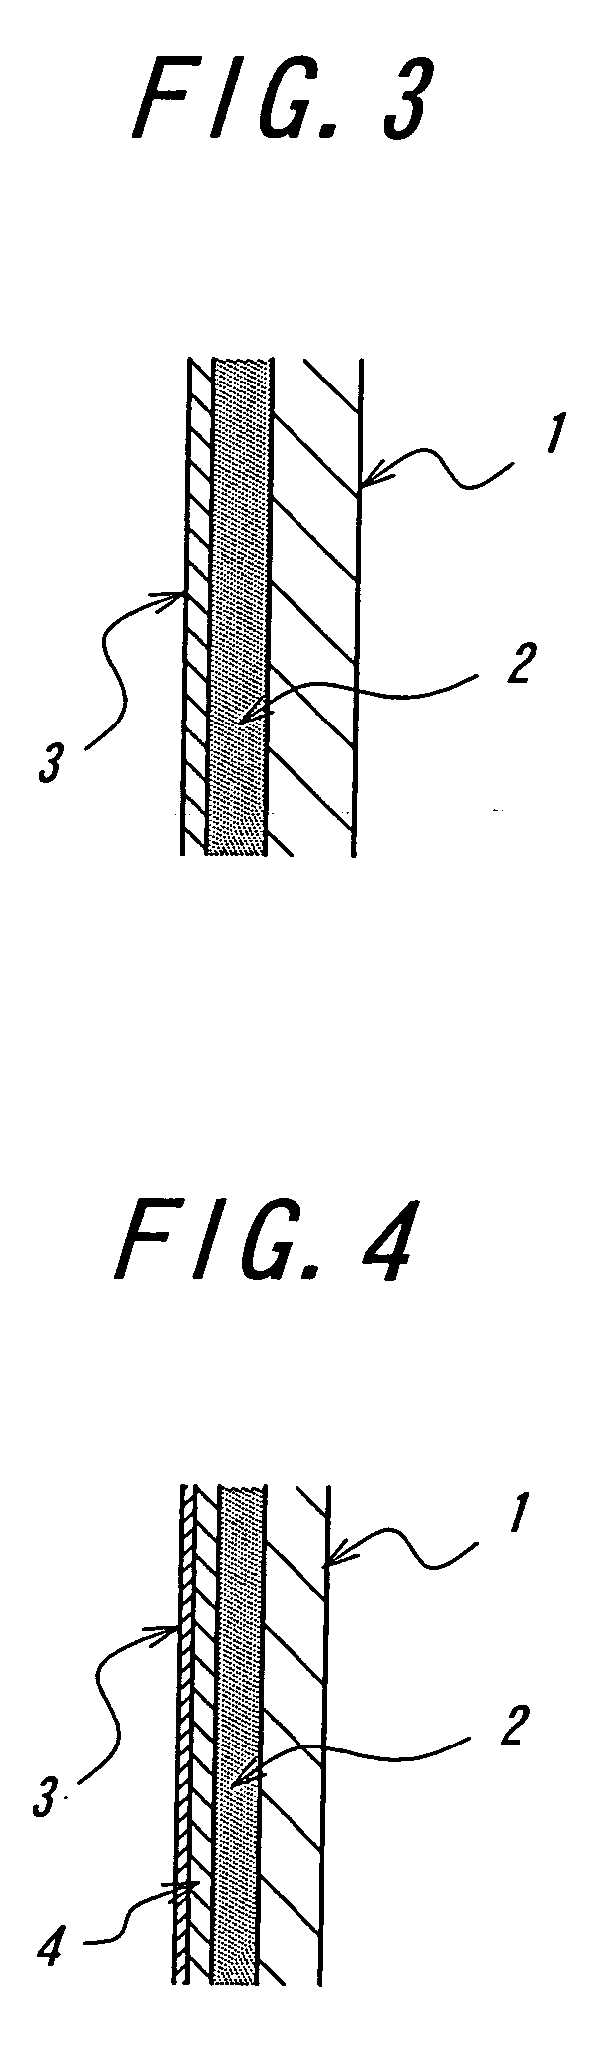 Laminated formed body and method of manufacturing the formed body